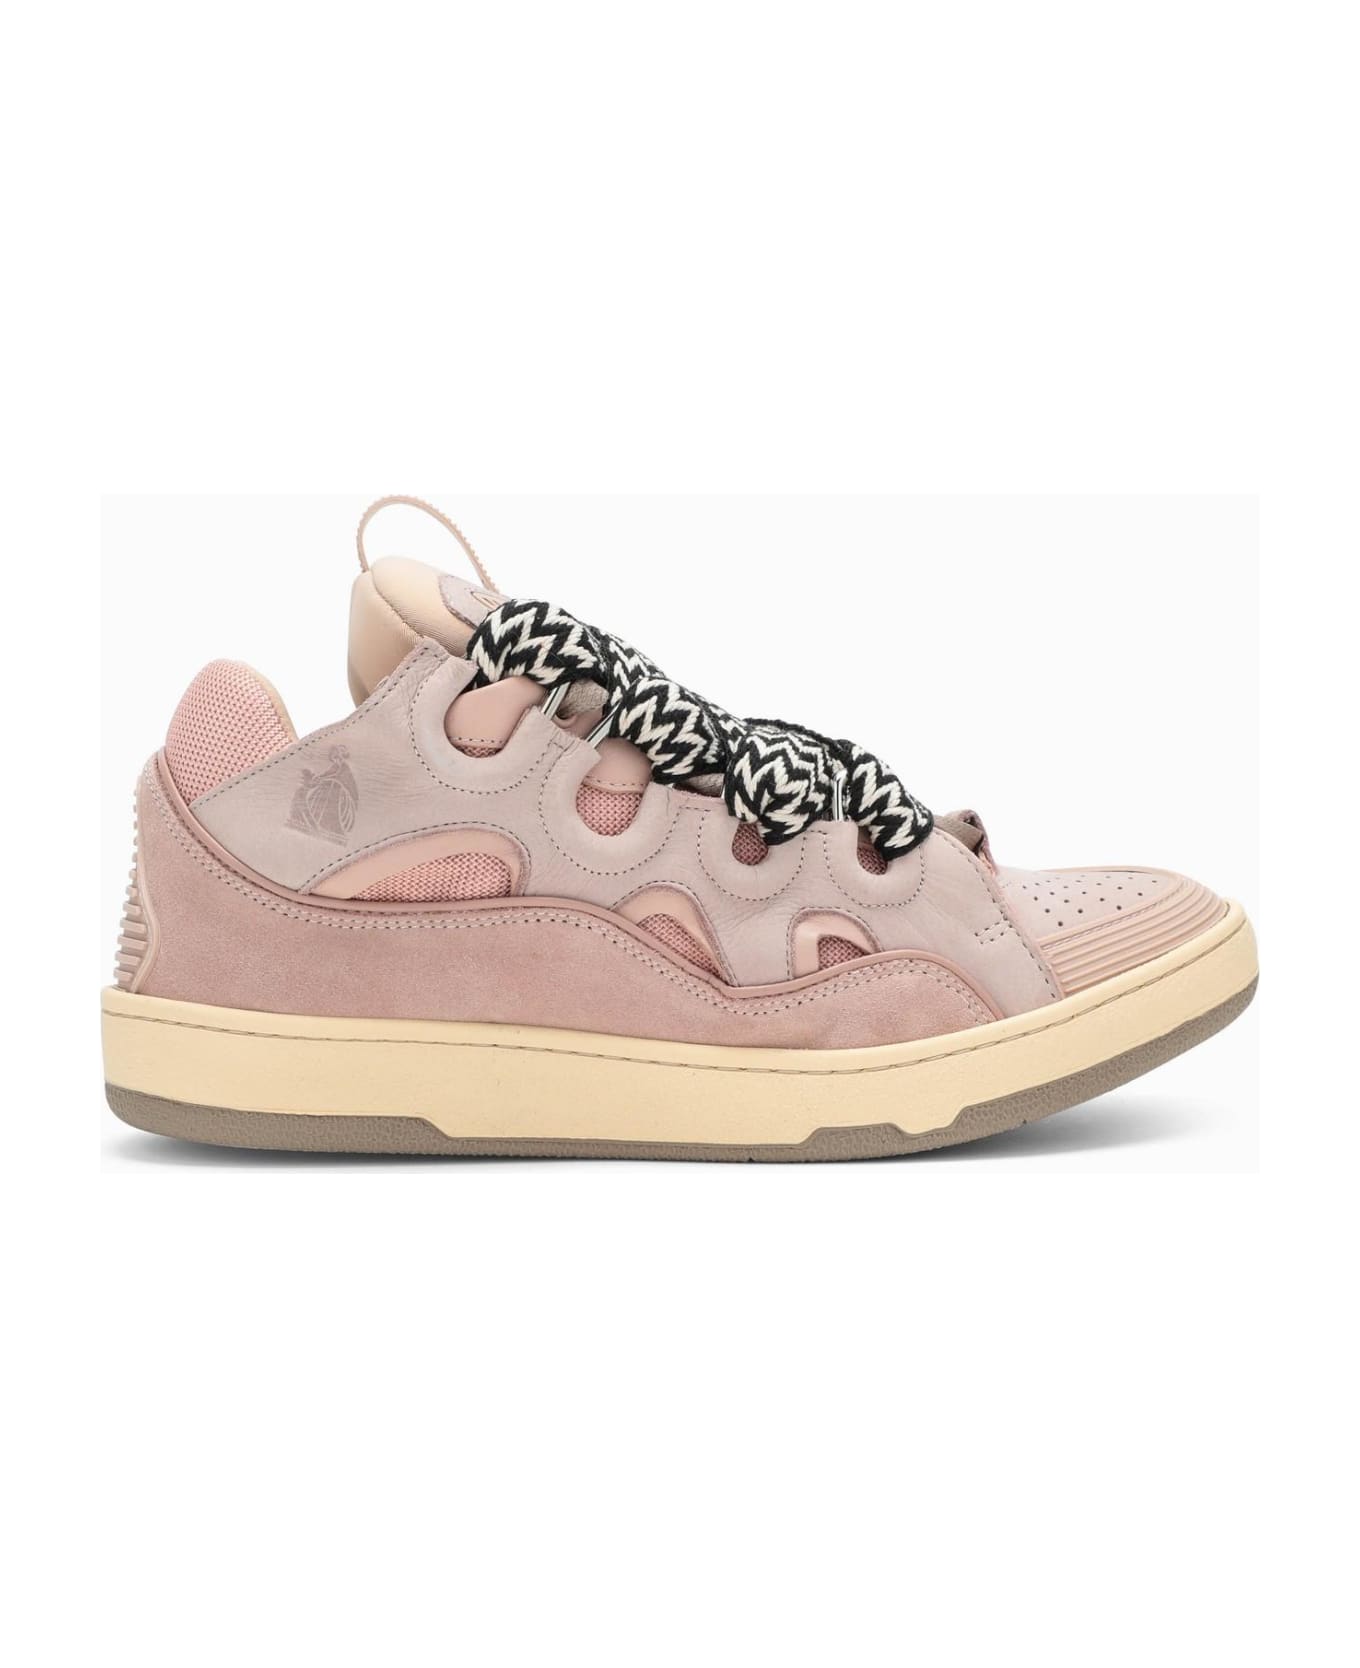 Lanvin Pink Leather Curb Sneakers - Pink